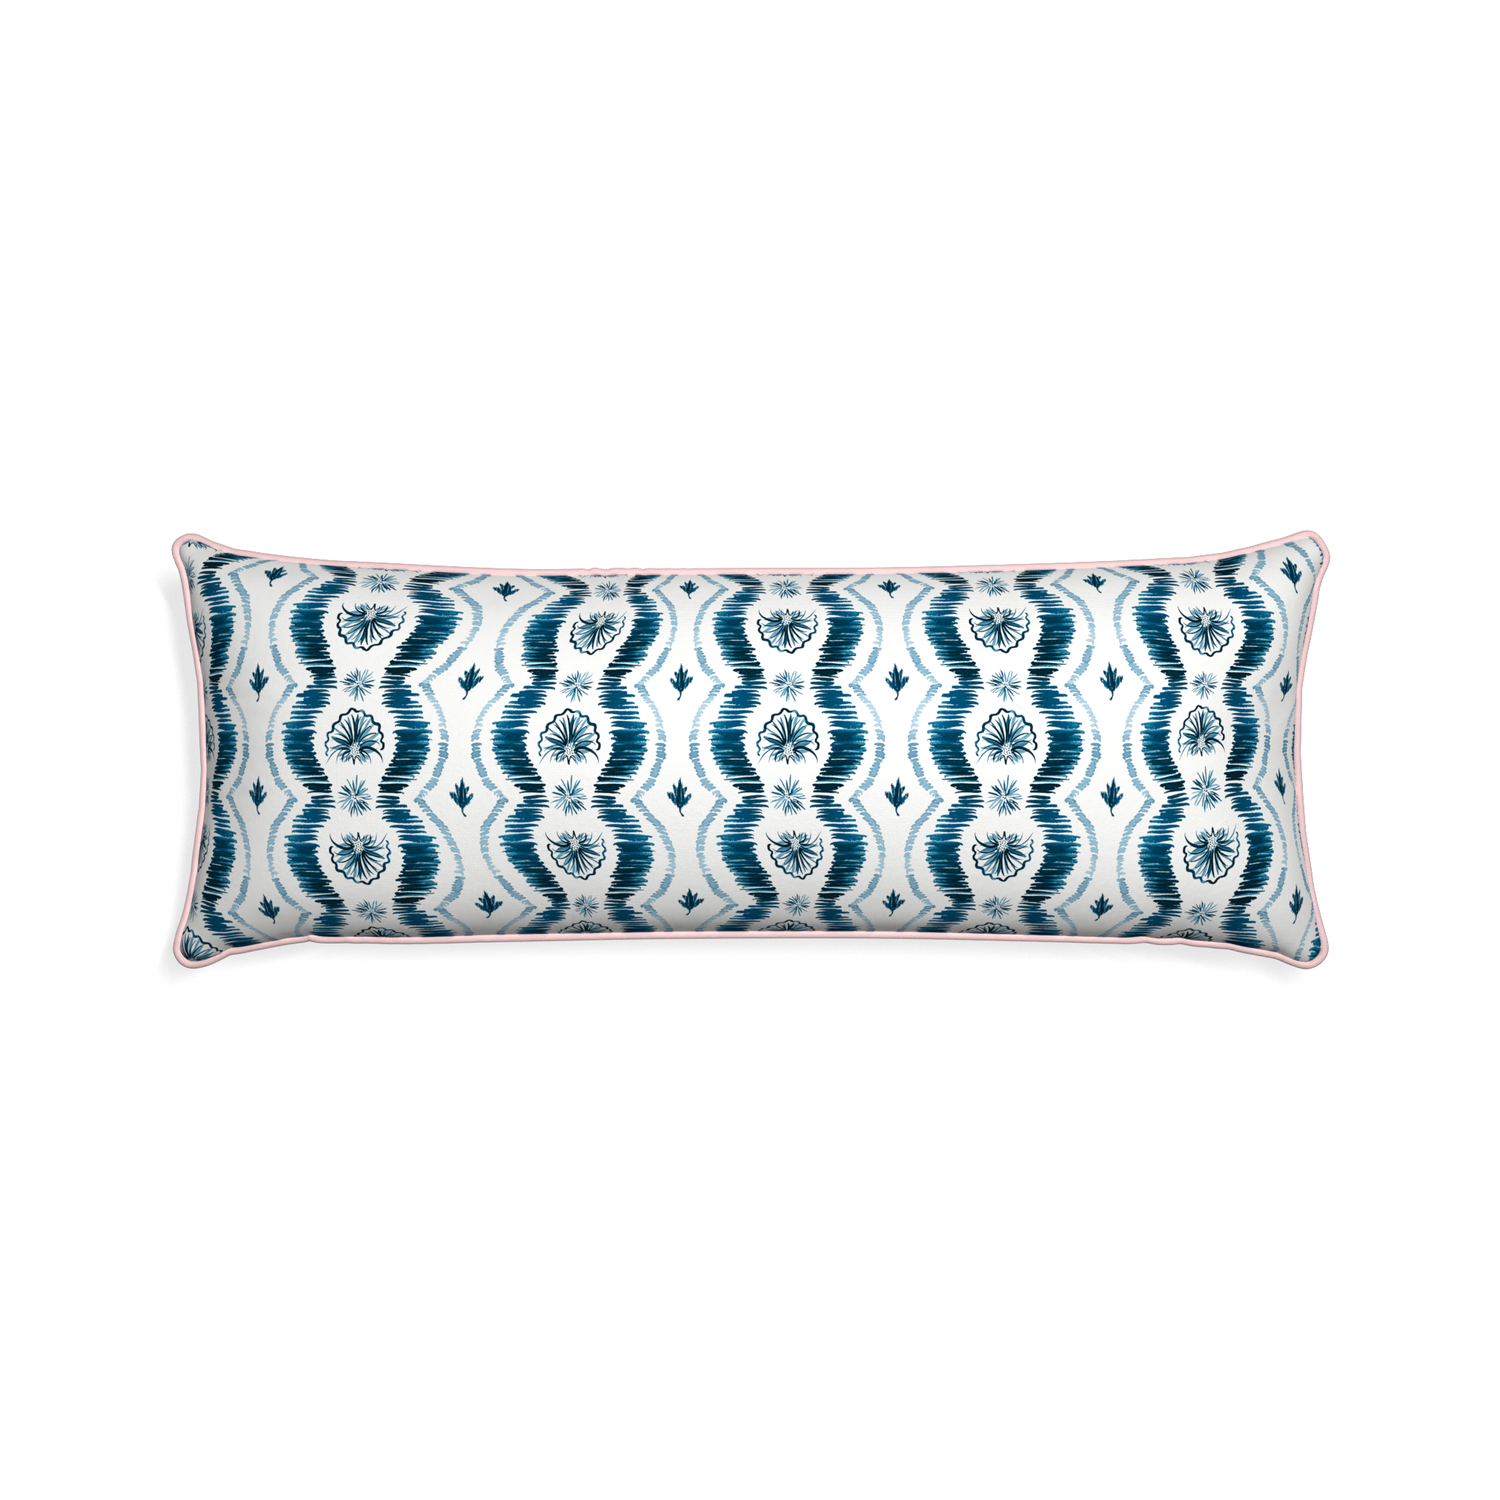 Xl-lumbar alice custom blue ikatpillow with petal piping on white background